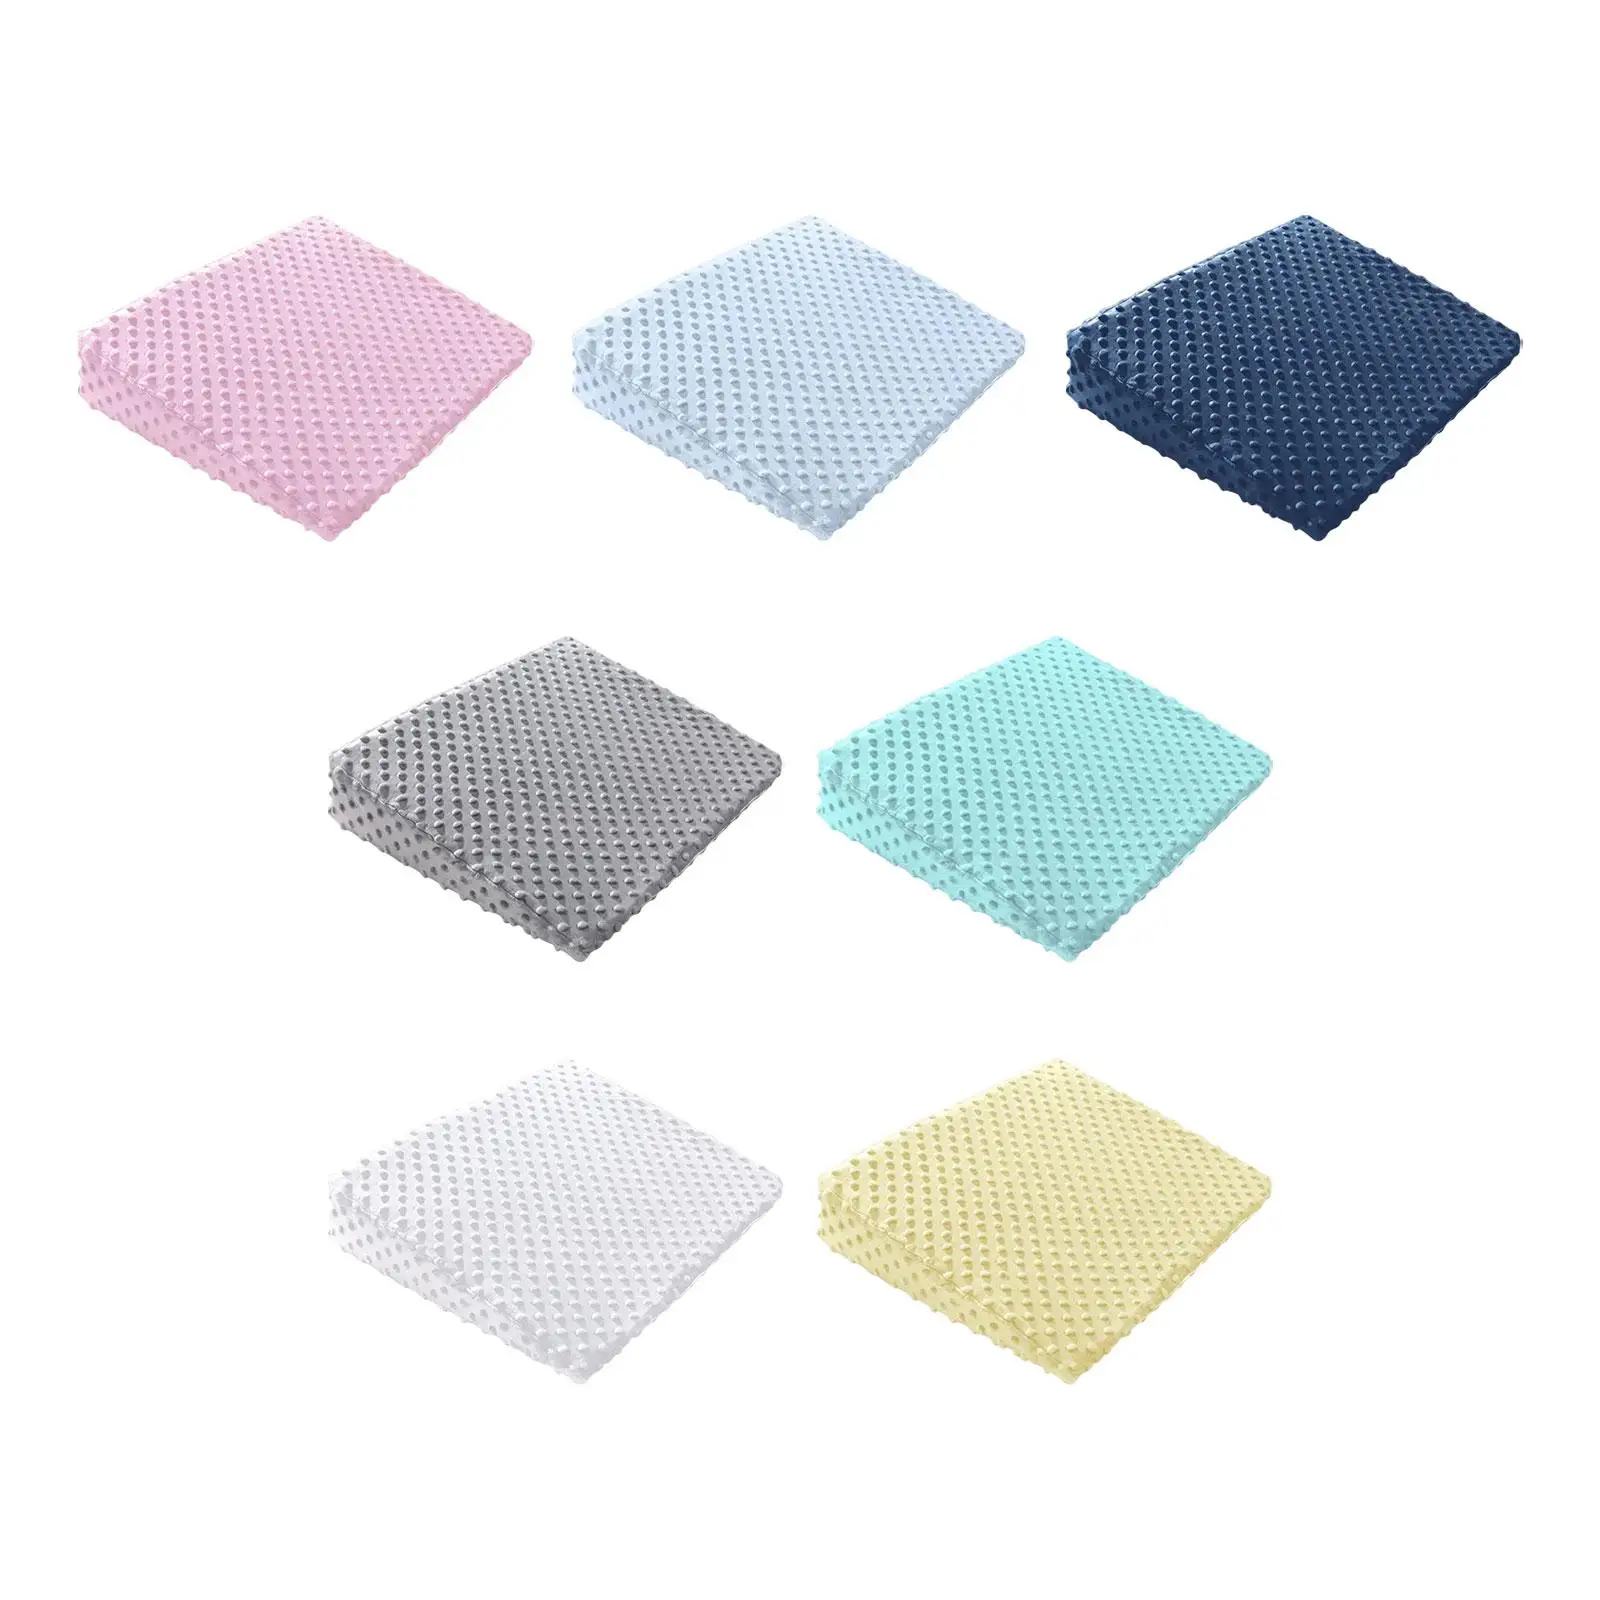 

Baby Wedge Bed pillow Mat Soft Side Sleeping Cushion with Removable Cover Anti Spitting Nursing Incline Pillow for Cot Crib